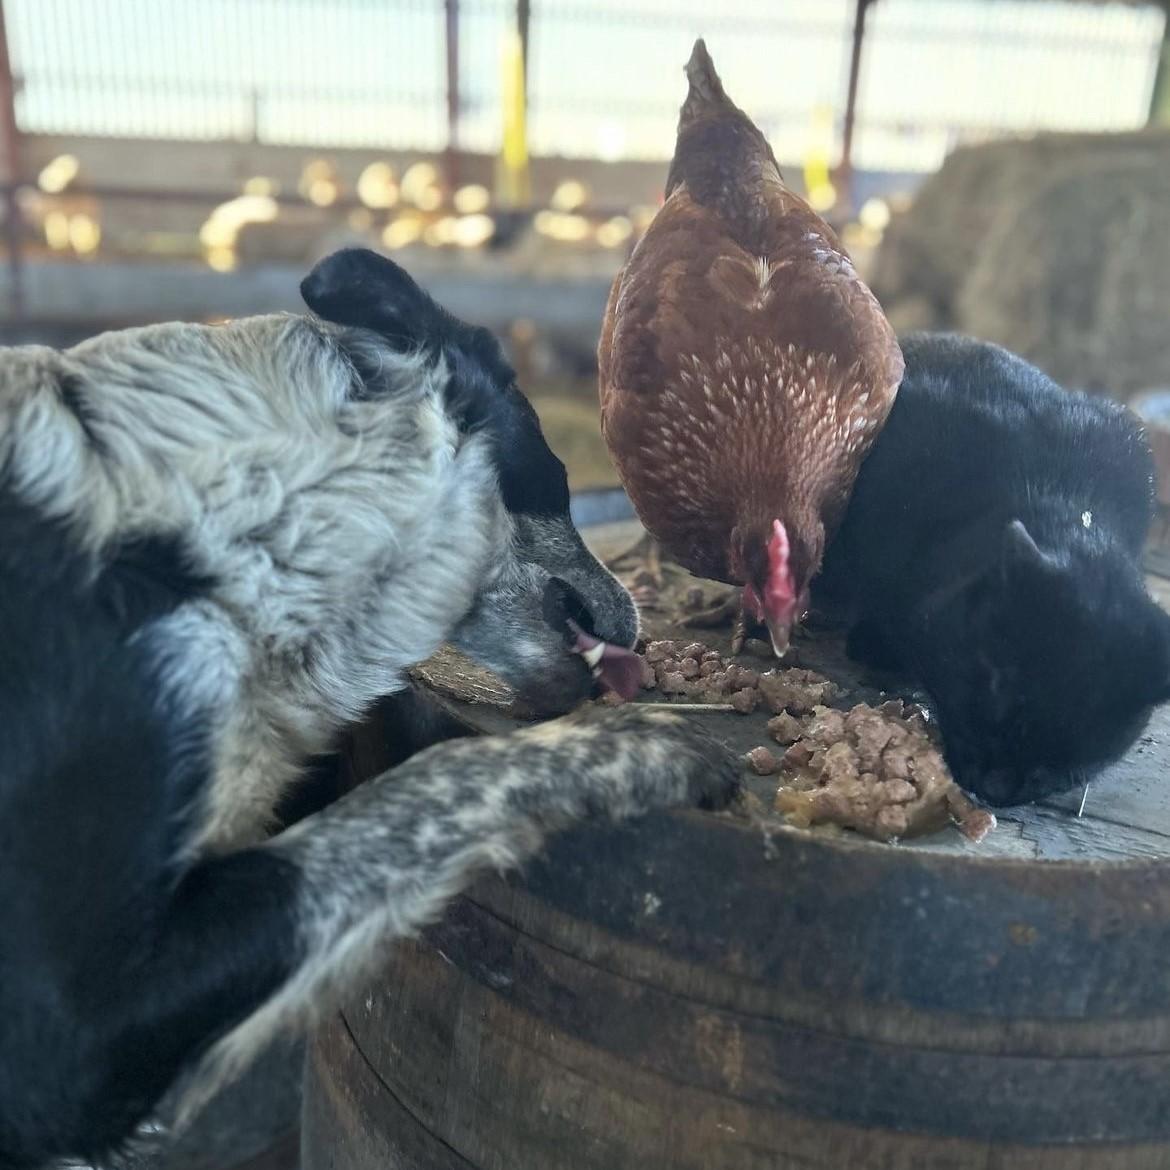 Dawn Holmes (Ofference Farm) - Sharing a meal